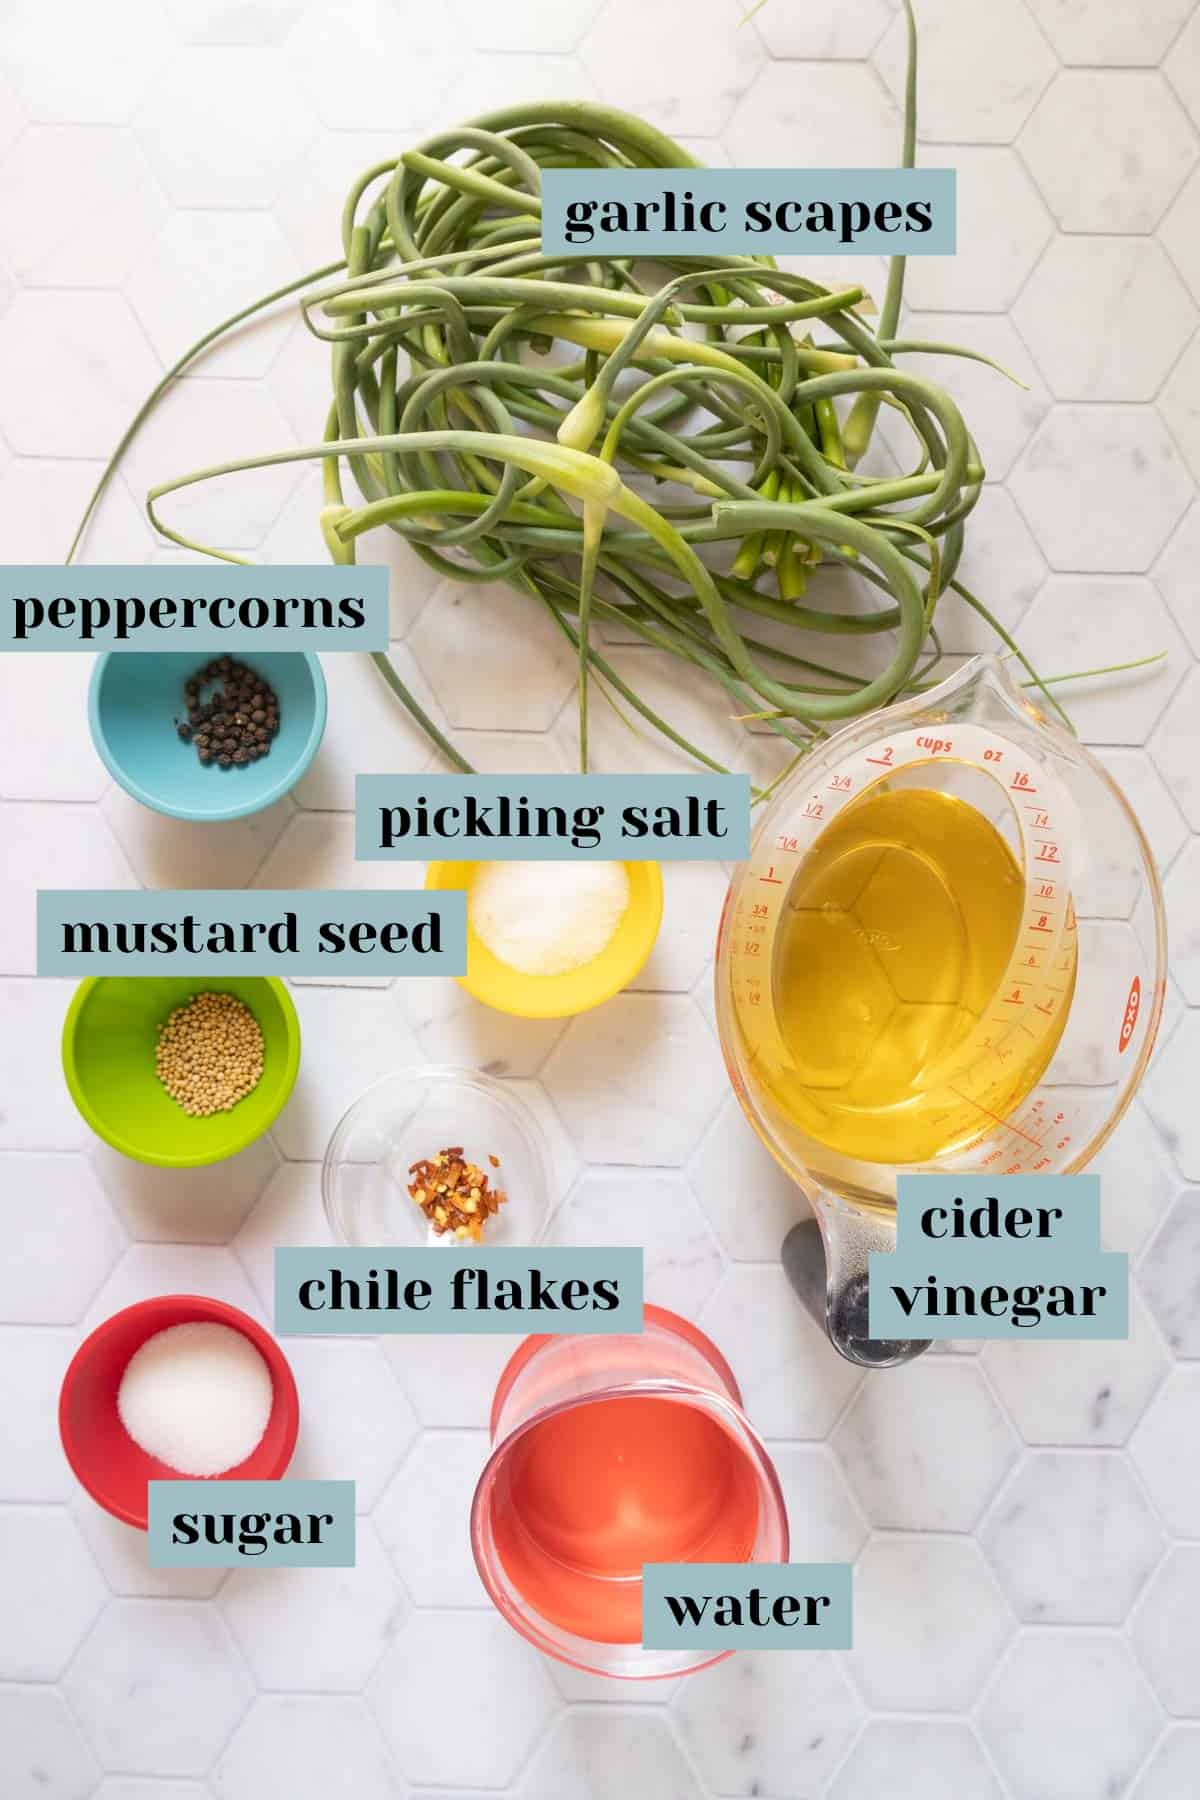 Ingredients for pickled garlic scapes on a tile surface with labels.